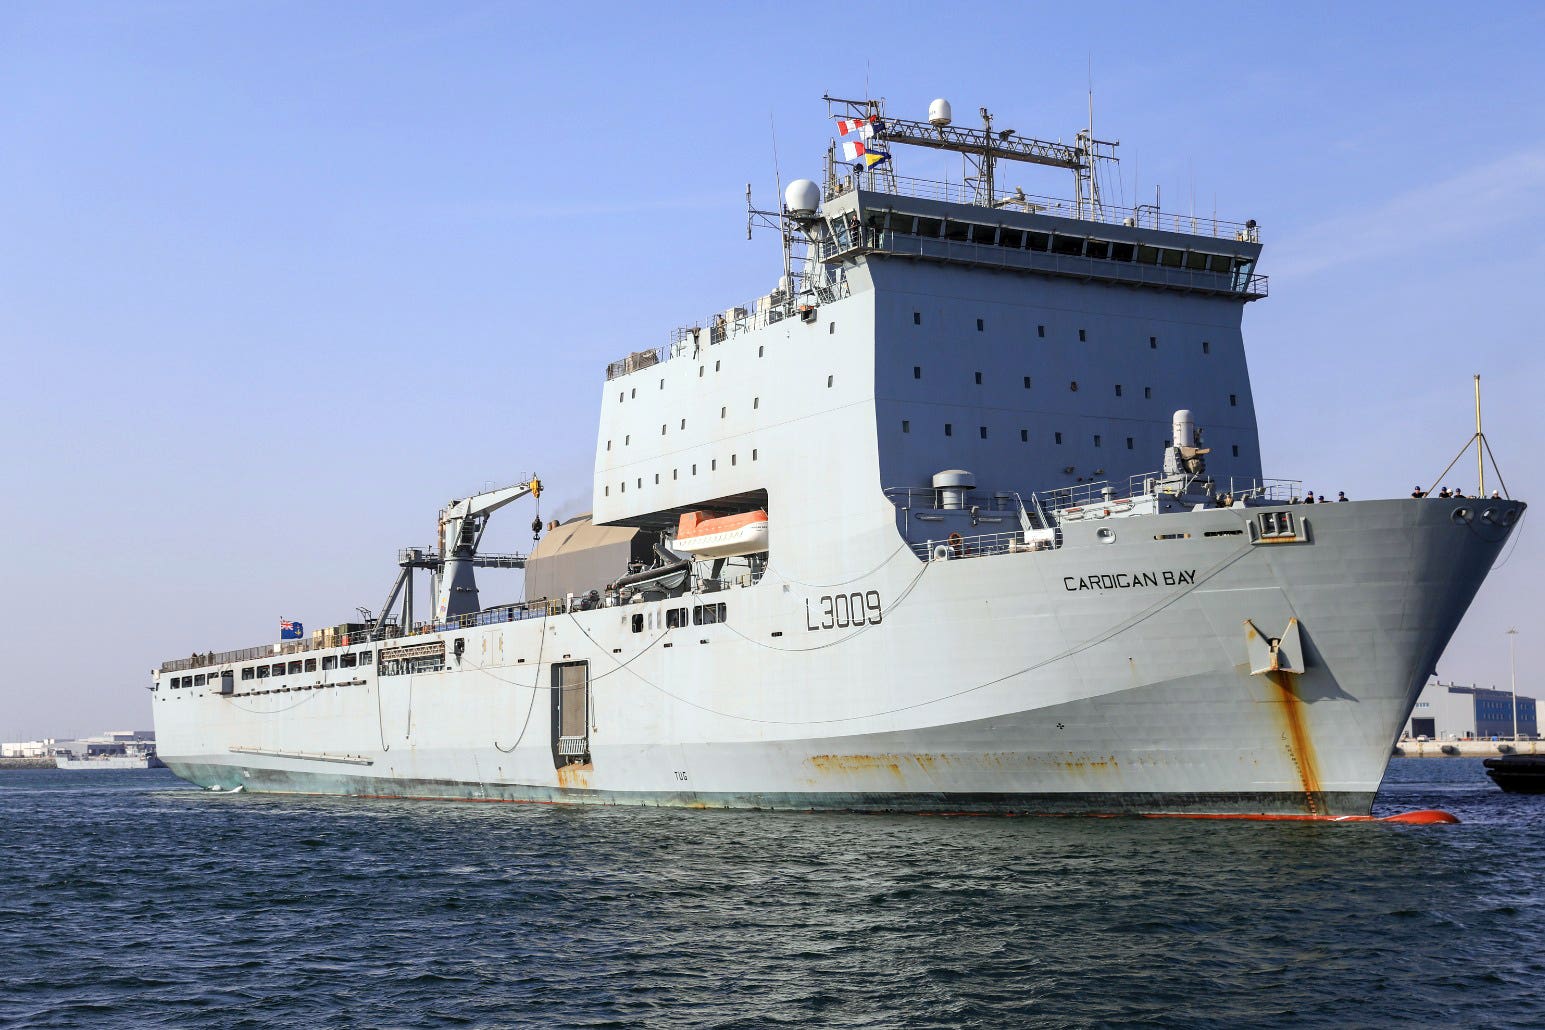 The British landing ship RFA Cardigan Bay is closely involved in a new aid operation